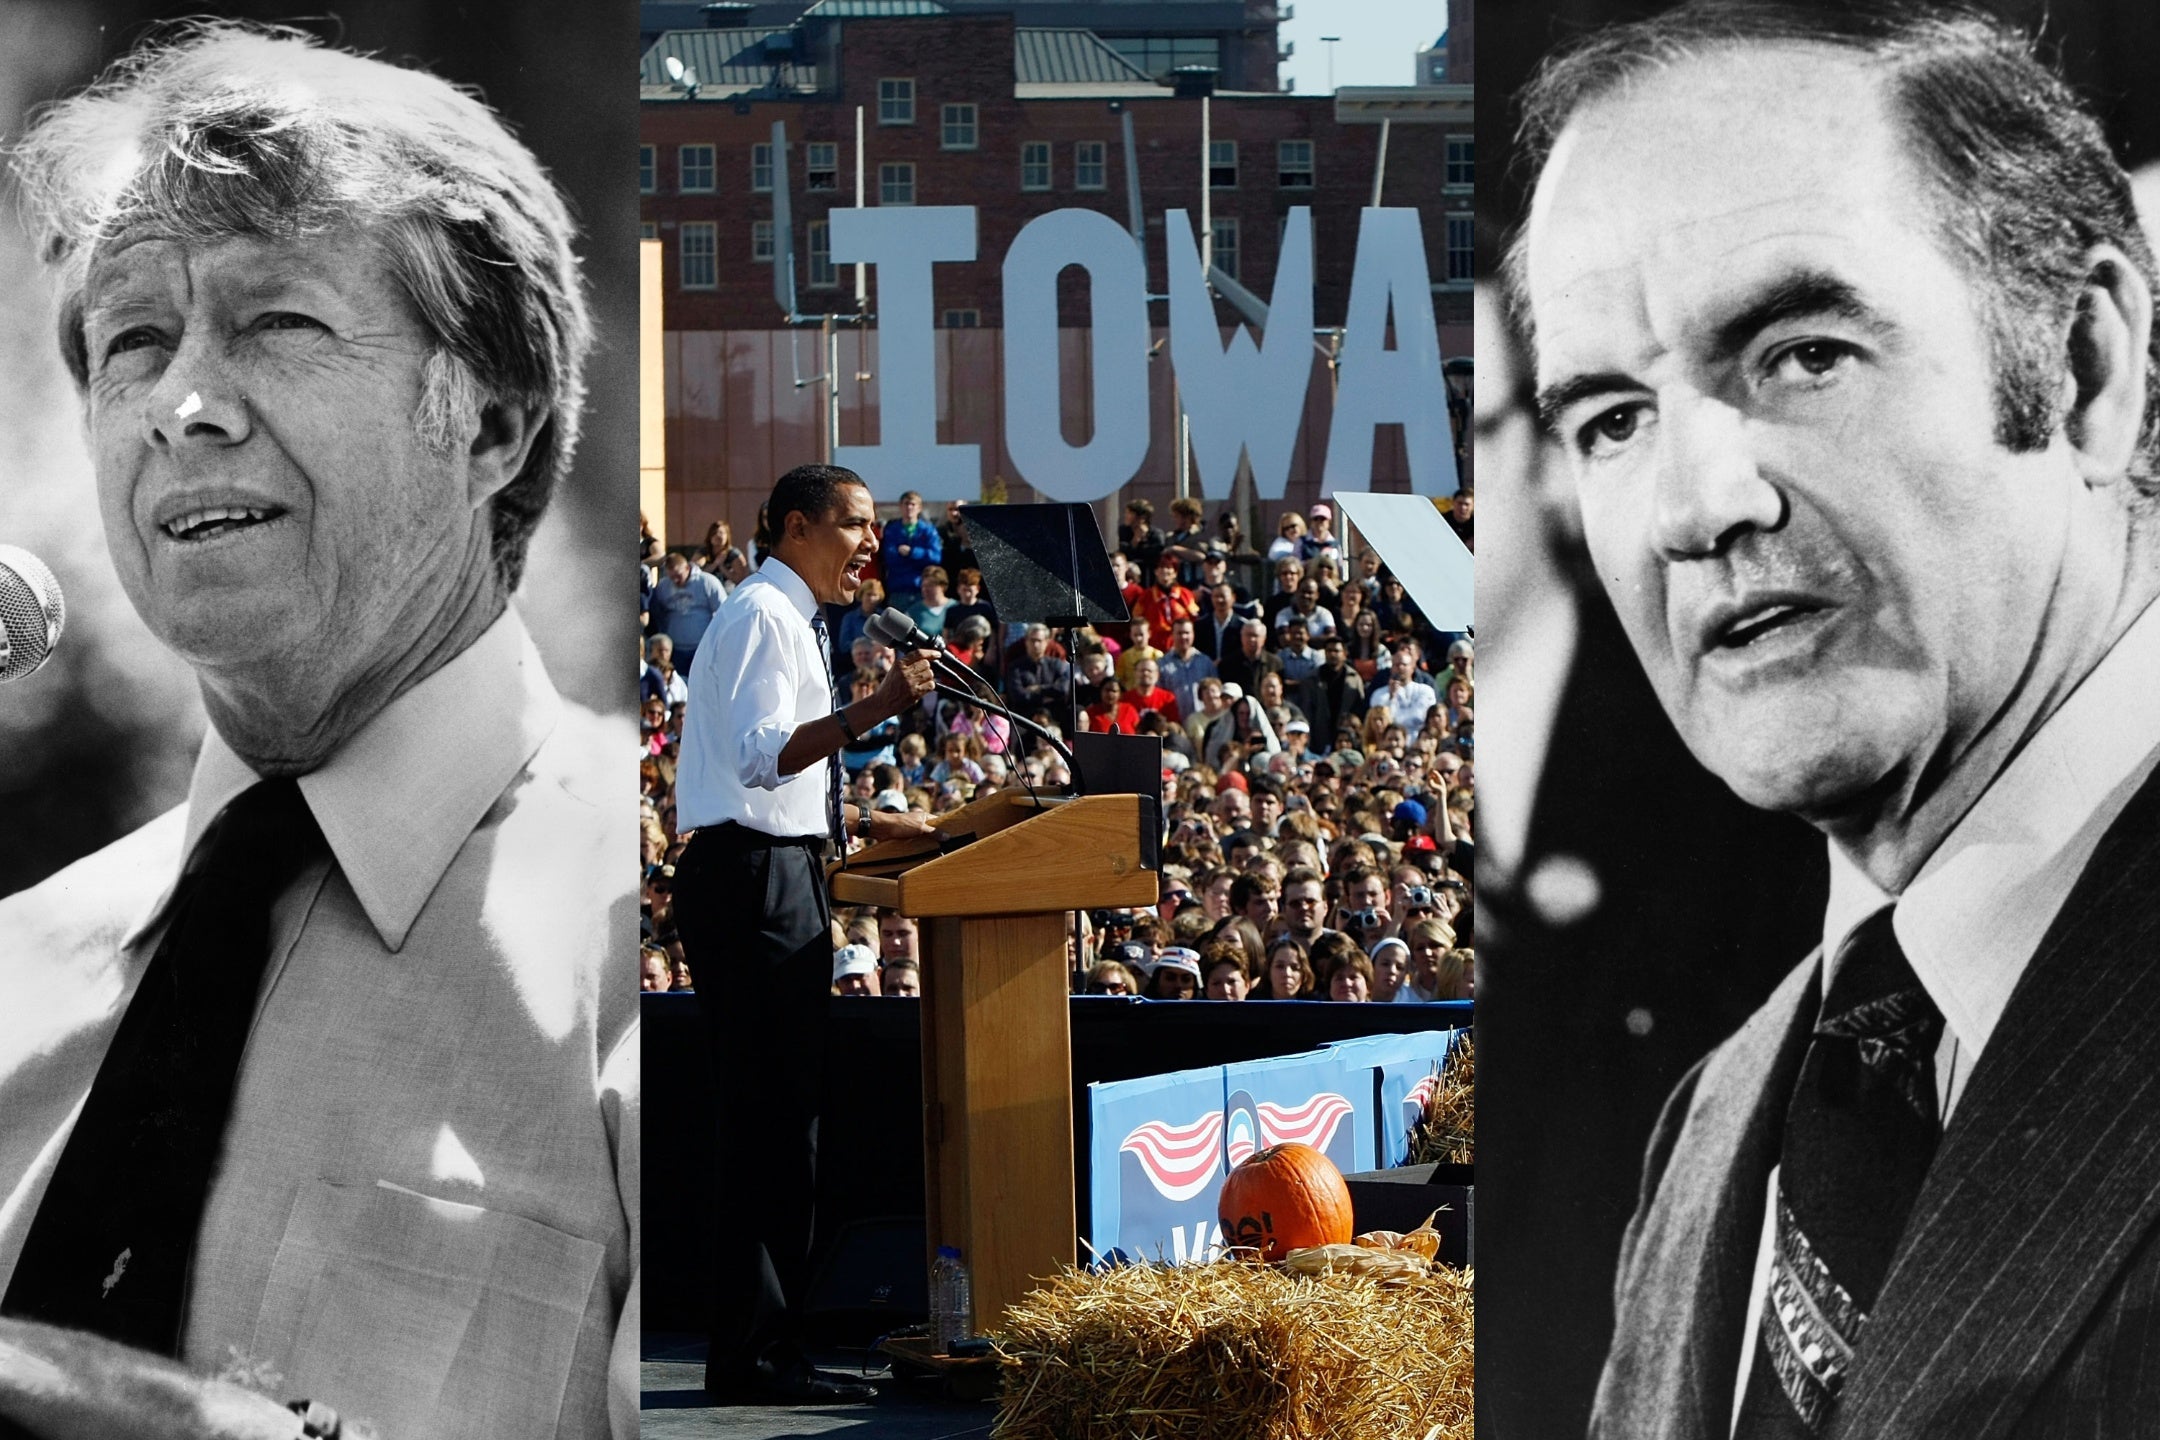 Jimmy Carter, Barack Obama, and George McGovern all got a campaign boost from performing above expectations in Iowa